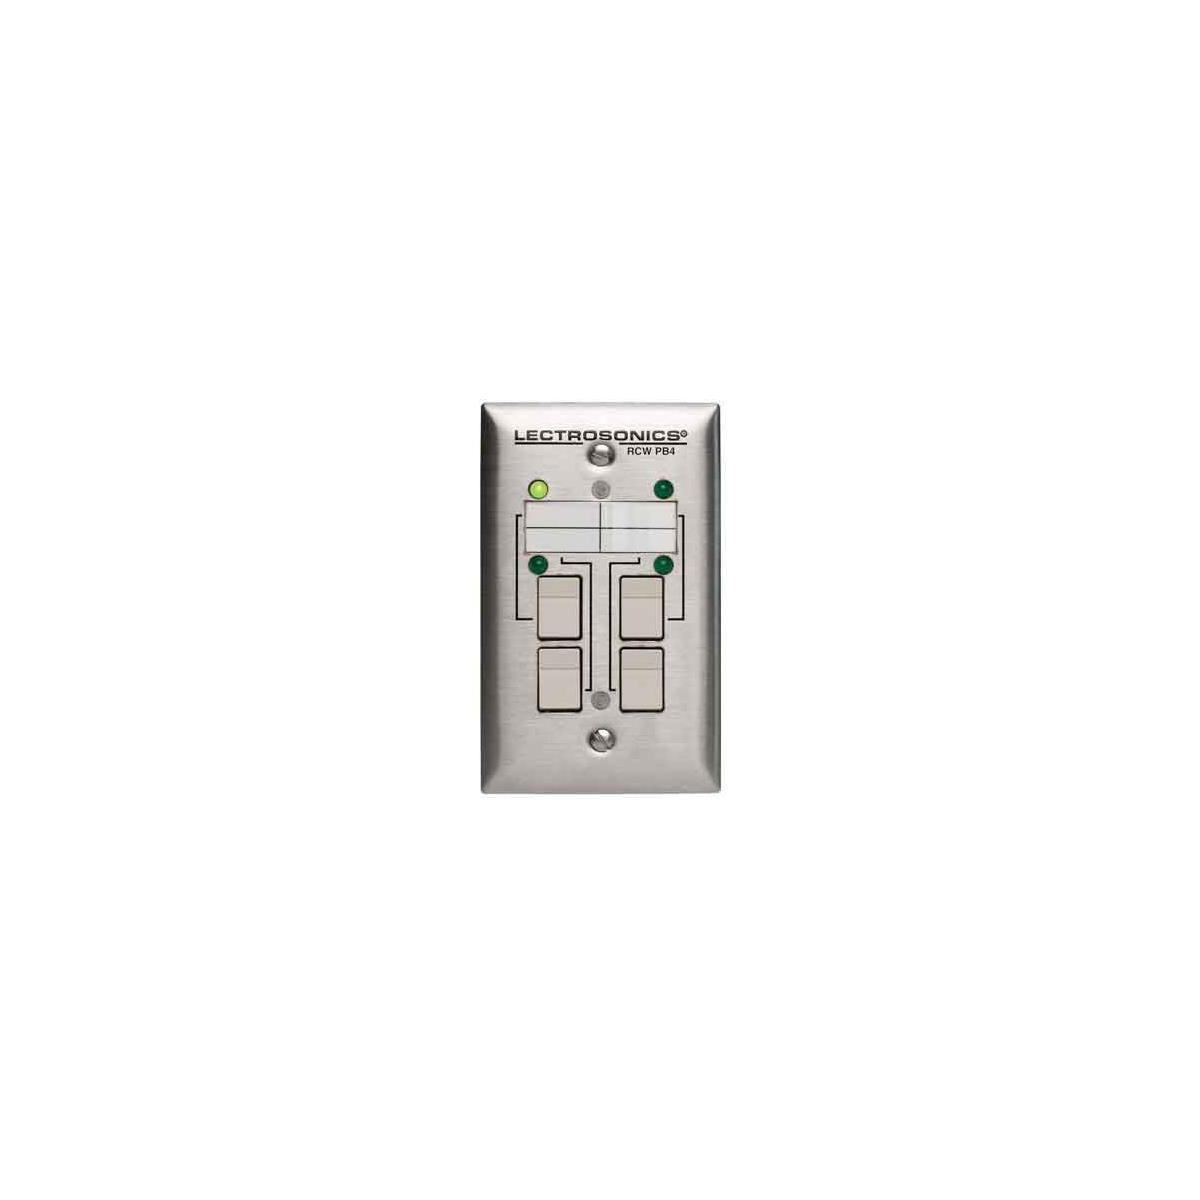 Image of Lectrosonics RCWPB4 Wallplate Control Interface for DM Series Processors